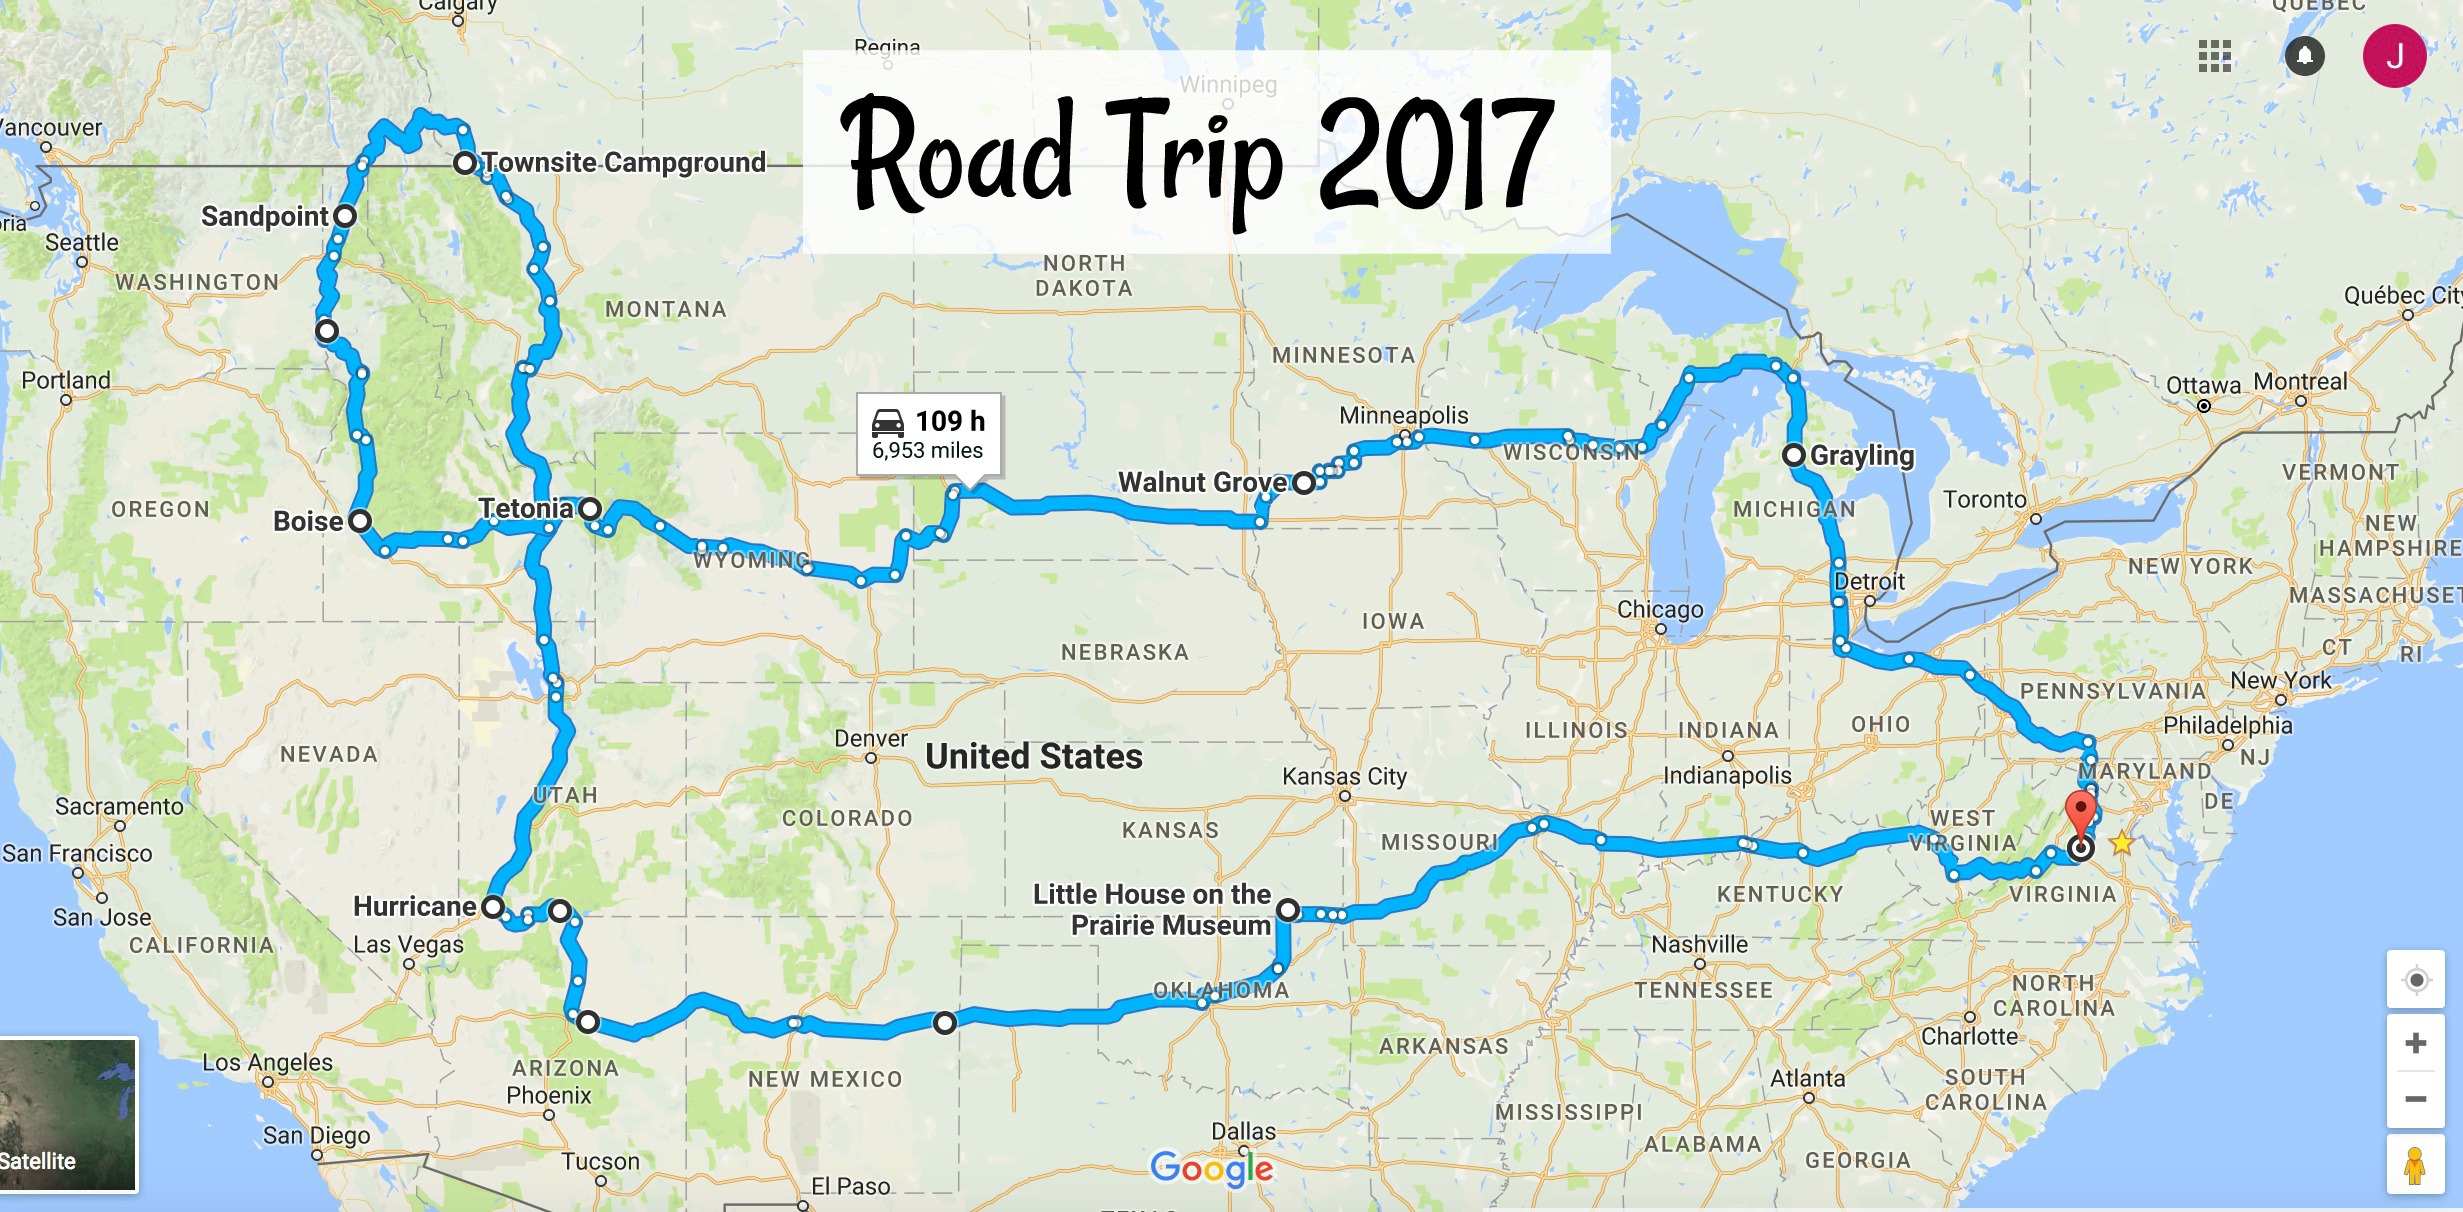 We had some fun experiences on our 5 week road trip around the US, as well as some mishaps and crazy moments. All part of a great road trip! Read more at ouradventuringfamily.com. 